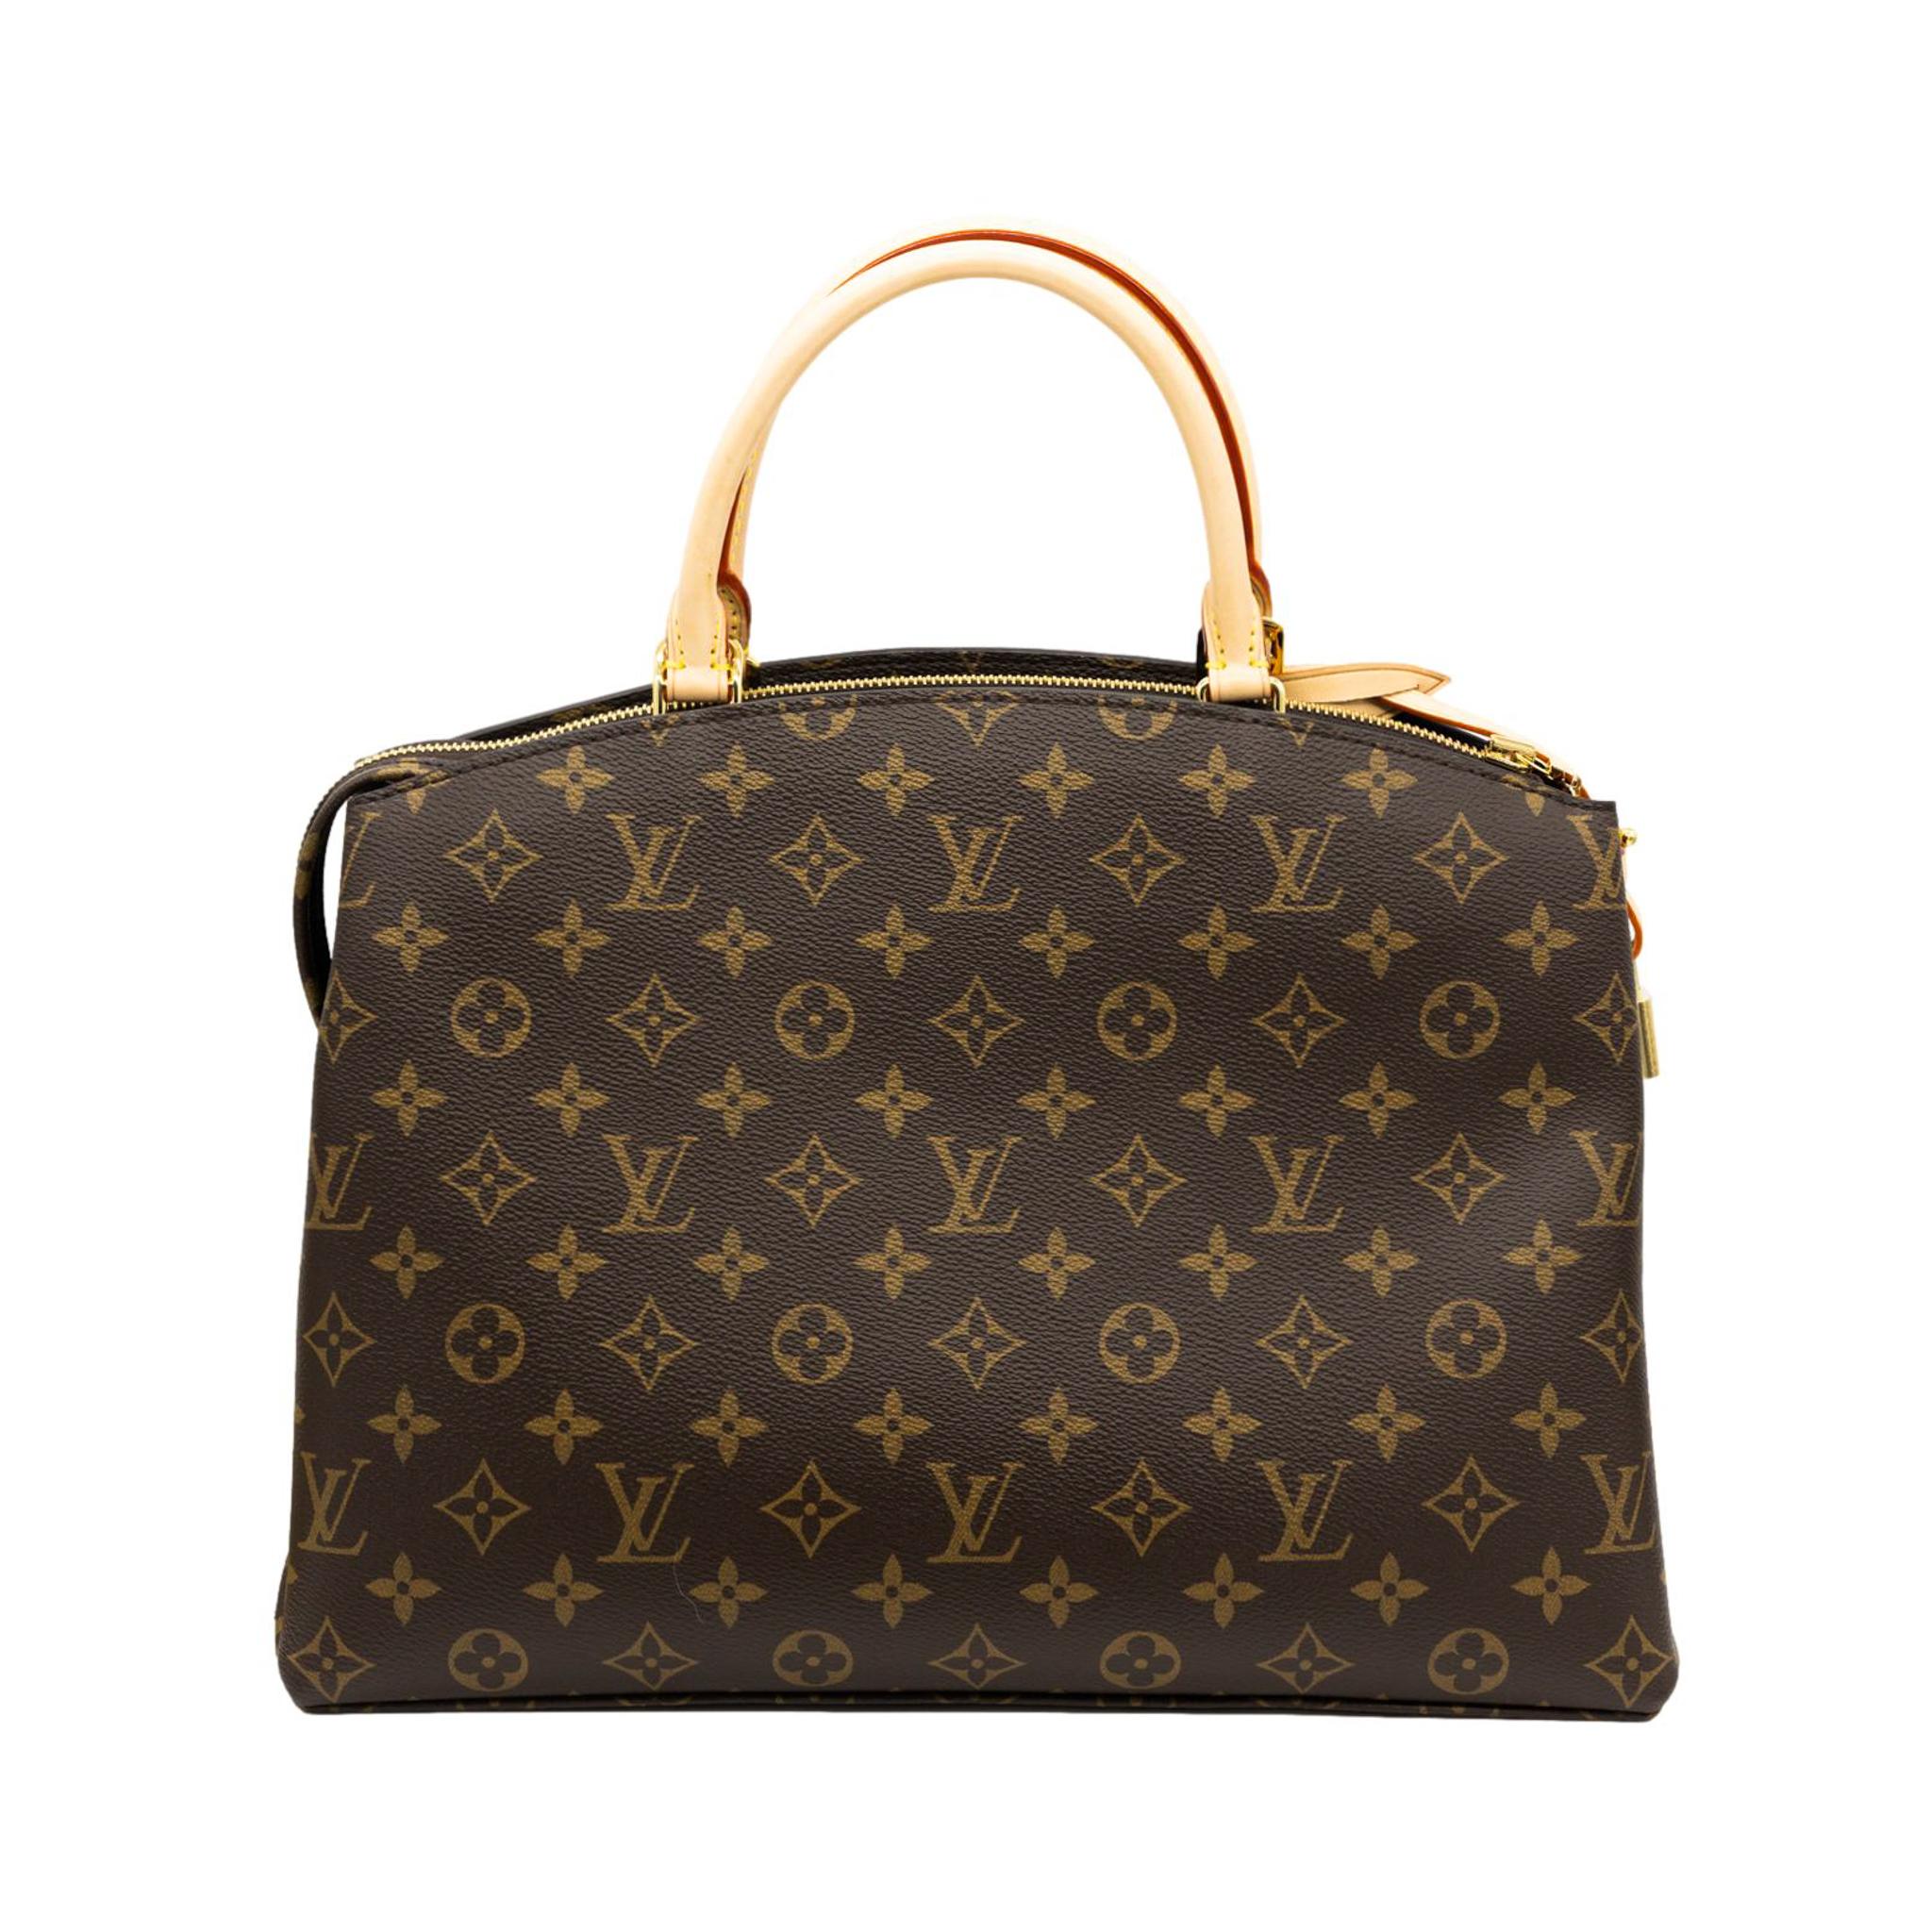 Louis Vuitton Monogram Canvas Grand Palais Top Handle Shoulder Bag, 2021. The Palais was introduced in 2019 and was designed with previous silhouettes in mind, the 